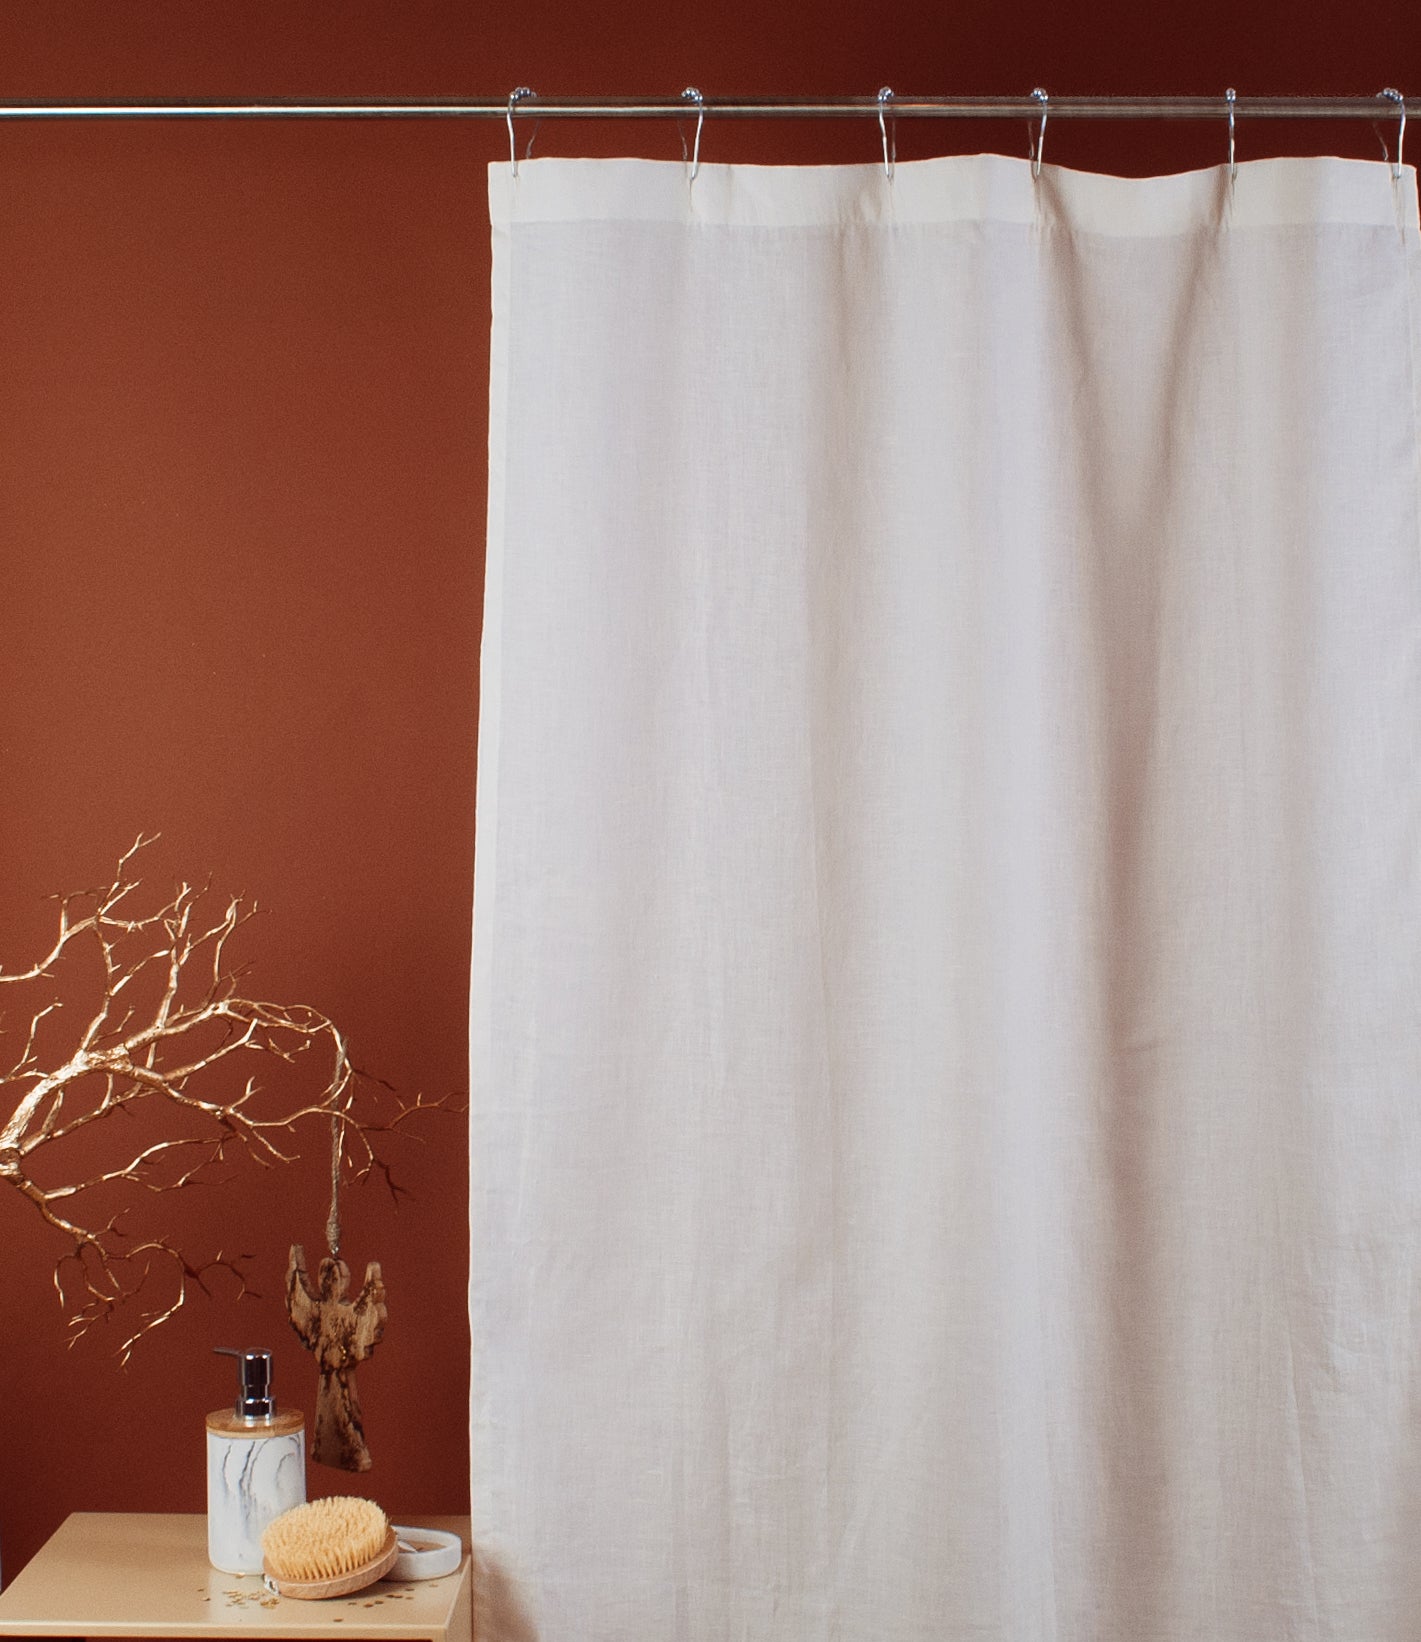 Linen Shower curtain with waterproof lining, Color: Off-White